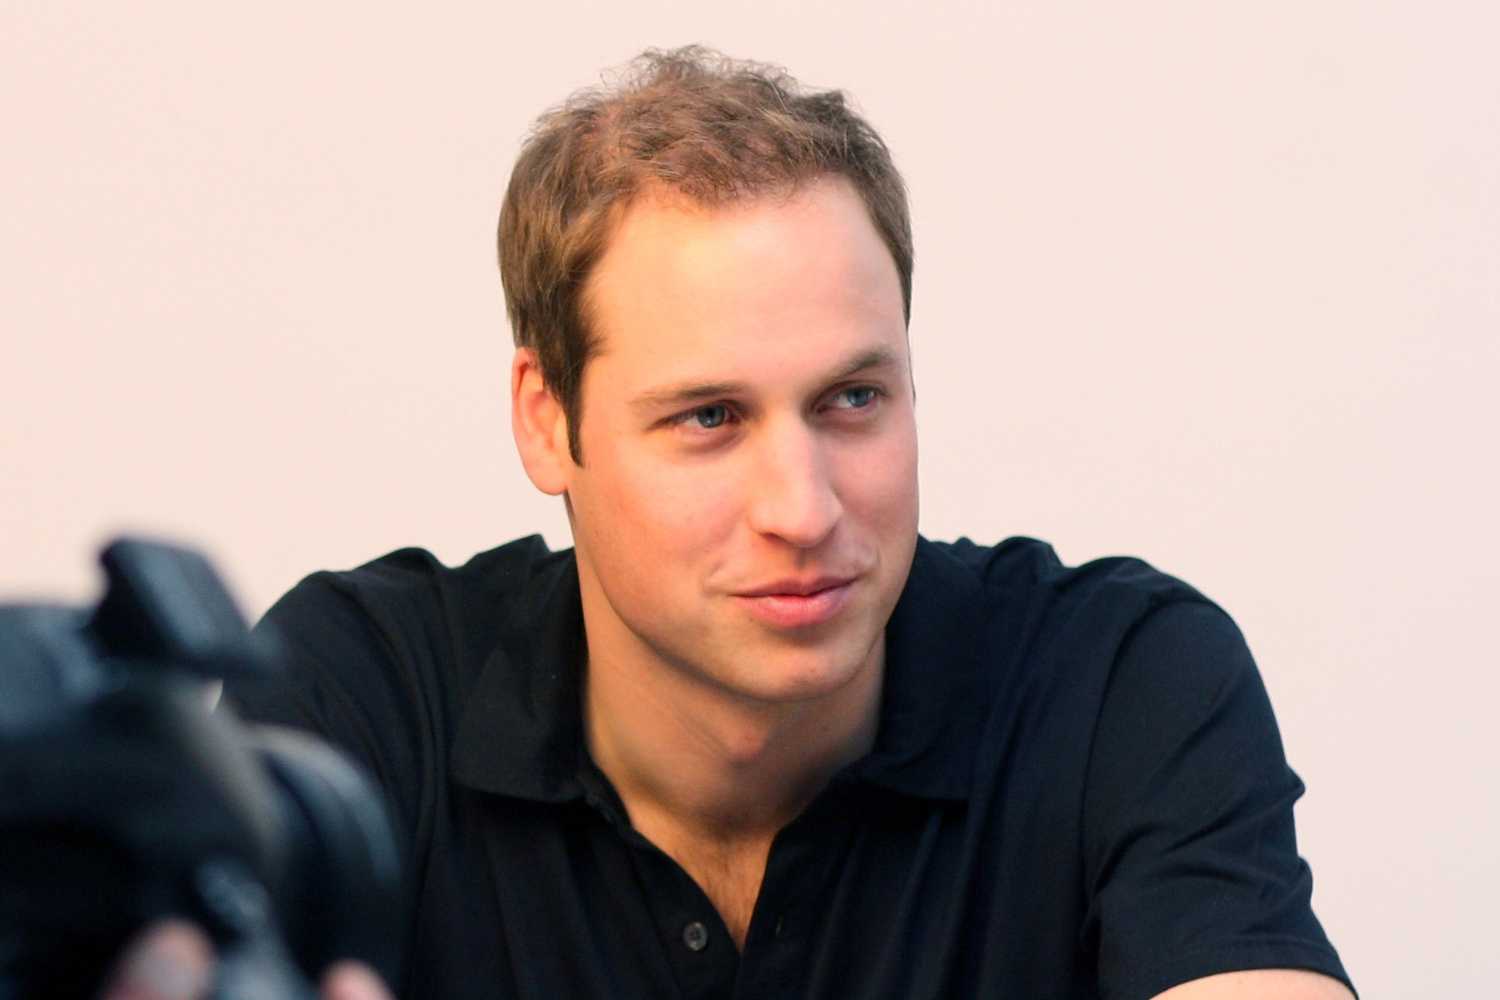 Prince William's Viral 'Model Moment' Has Royal Fans Swooning